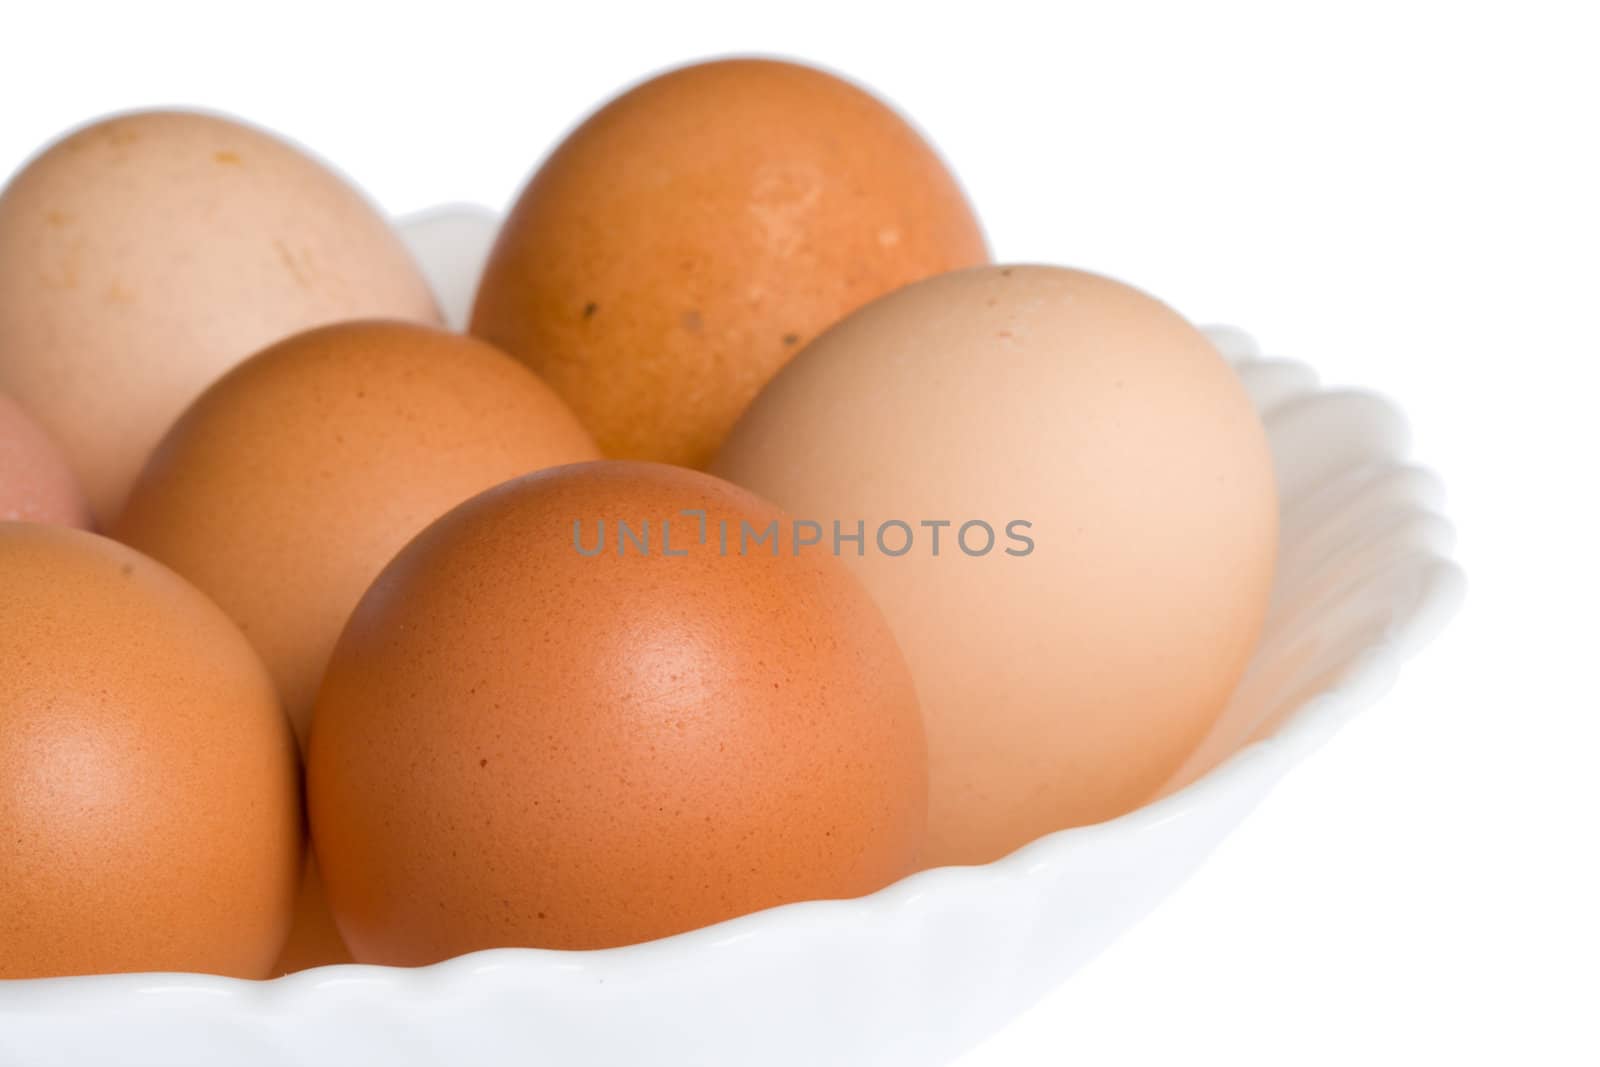 eggs on white plate by Alekcey